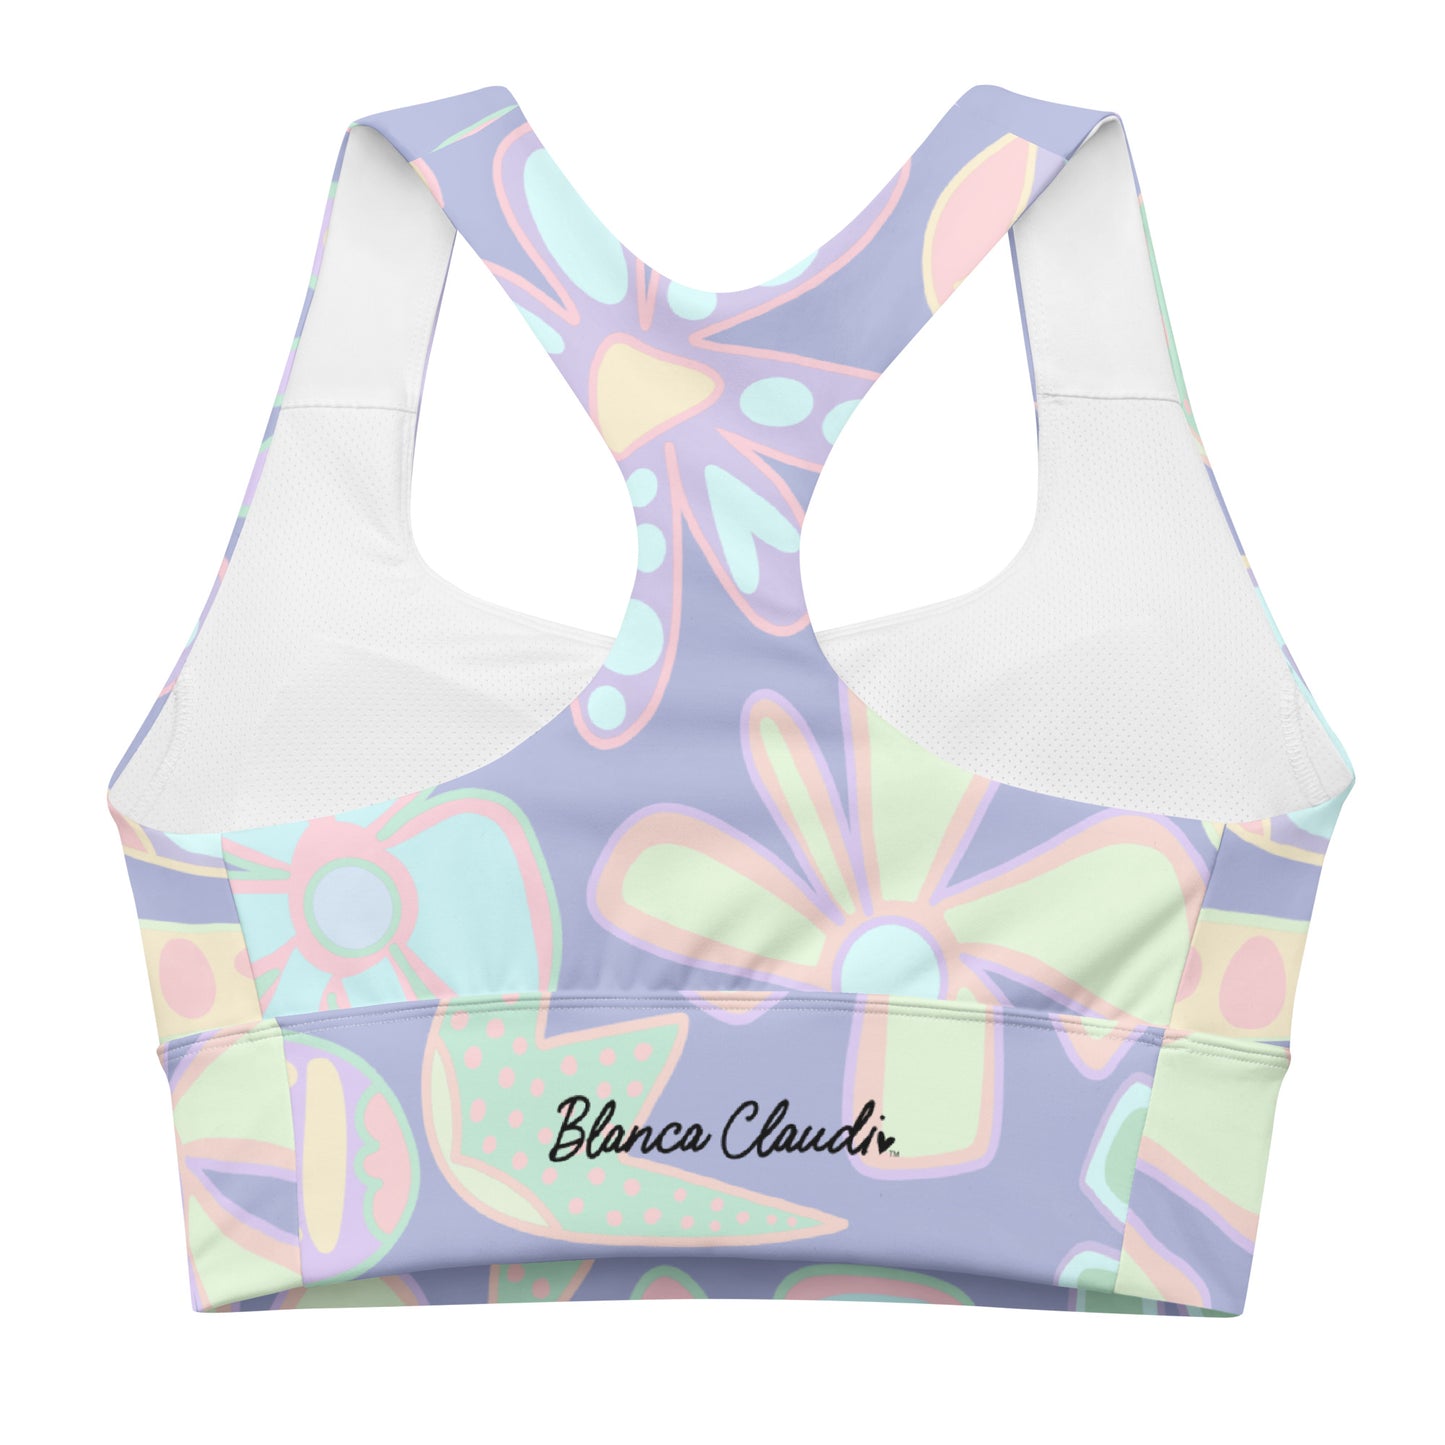 BC Easter Limited Edition High Support Longline Sport Bra